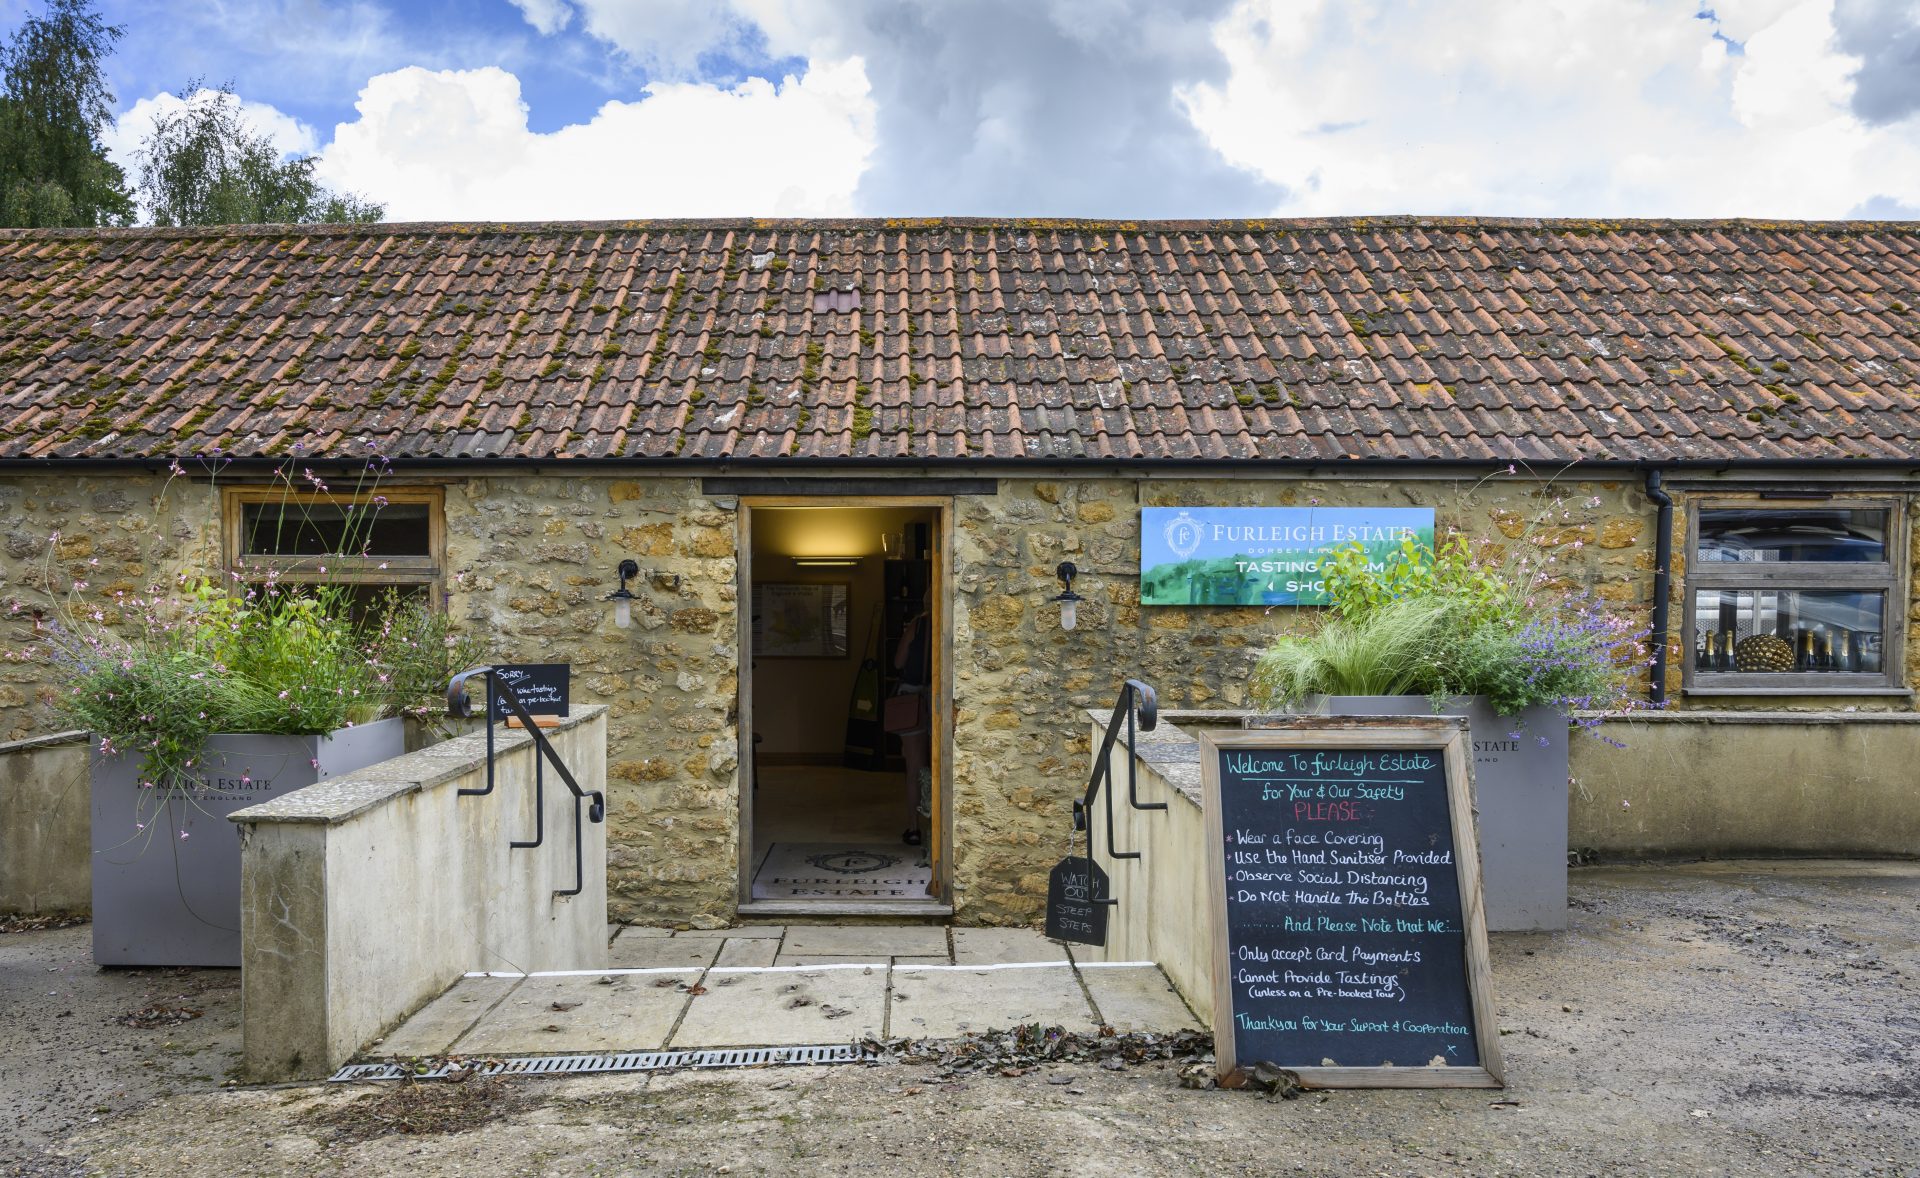 The Tasting Room and Cellar Door shop at Furleigh Estate